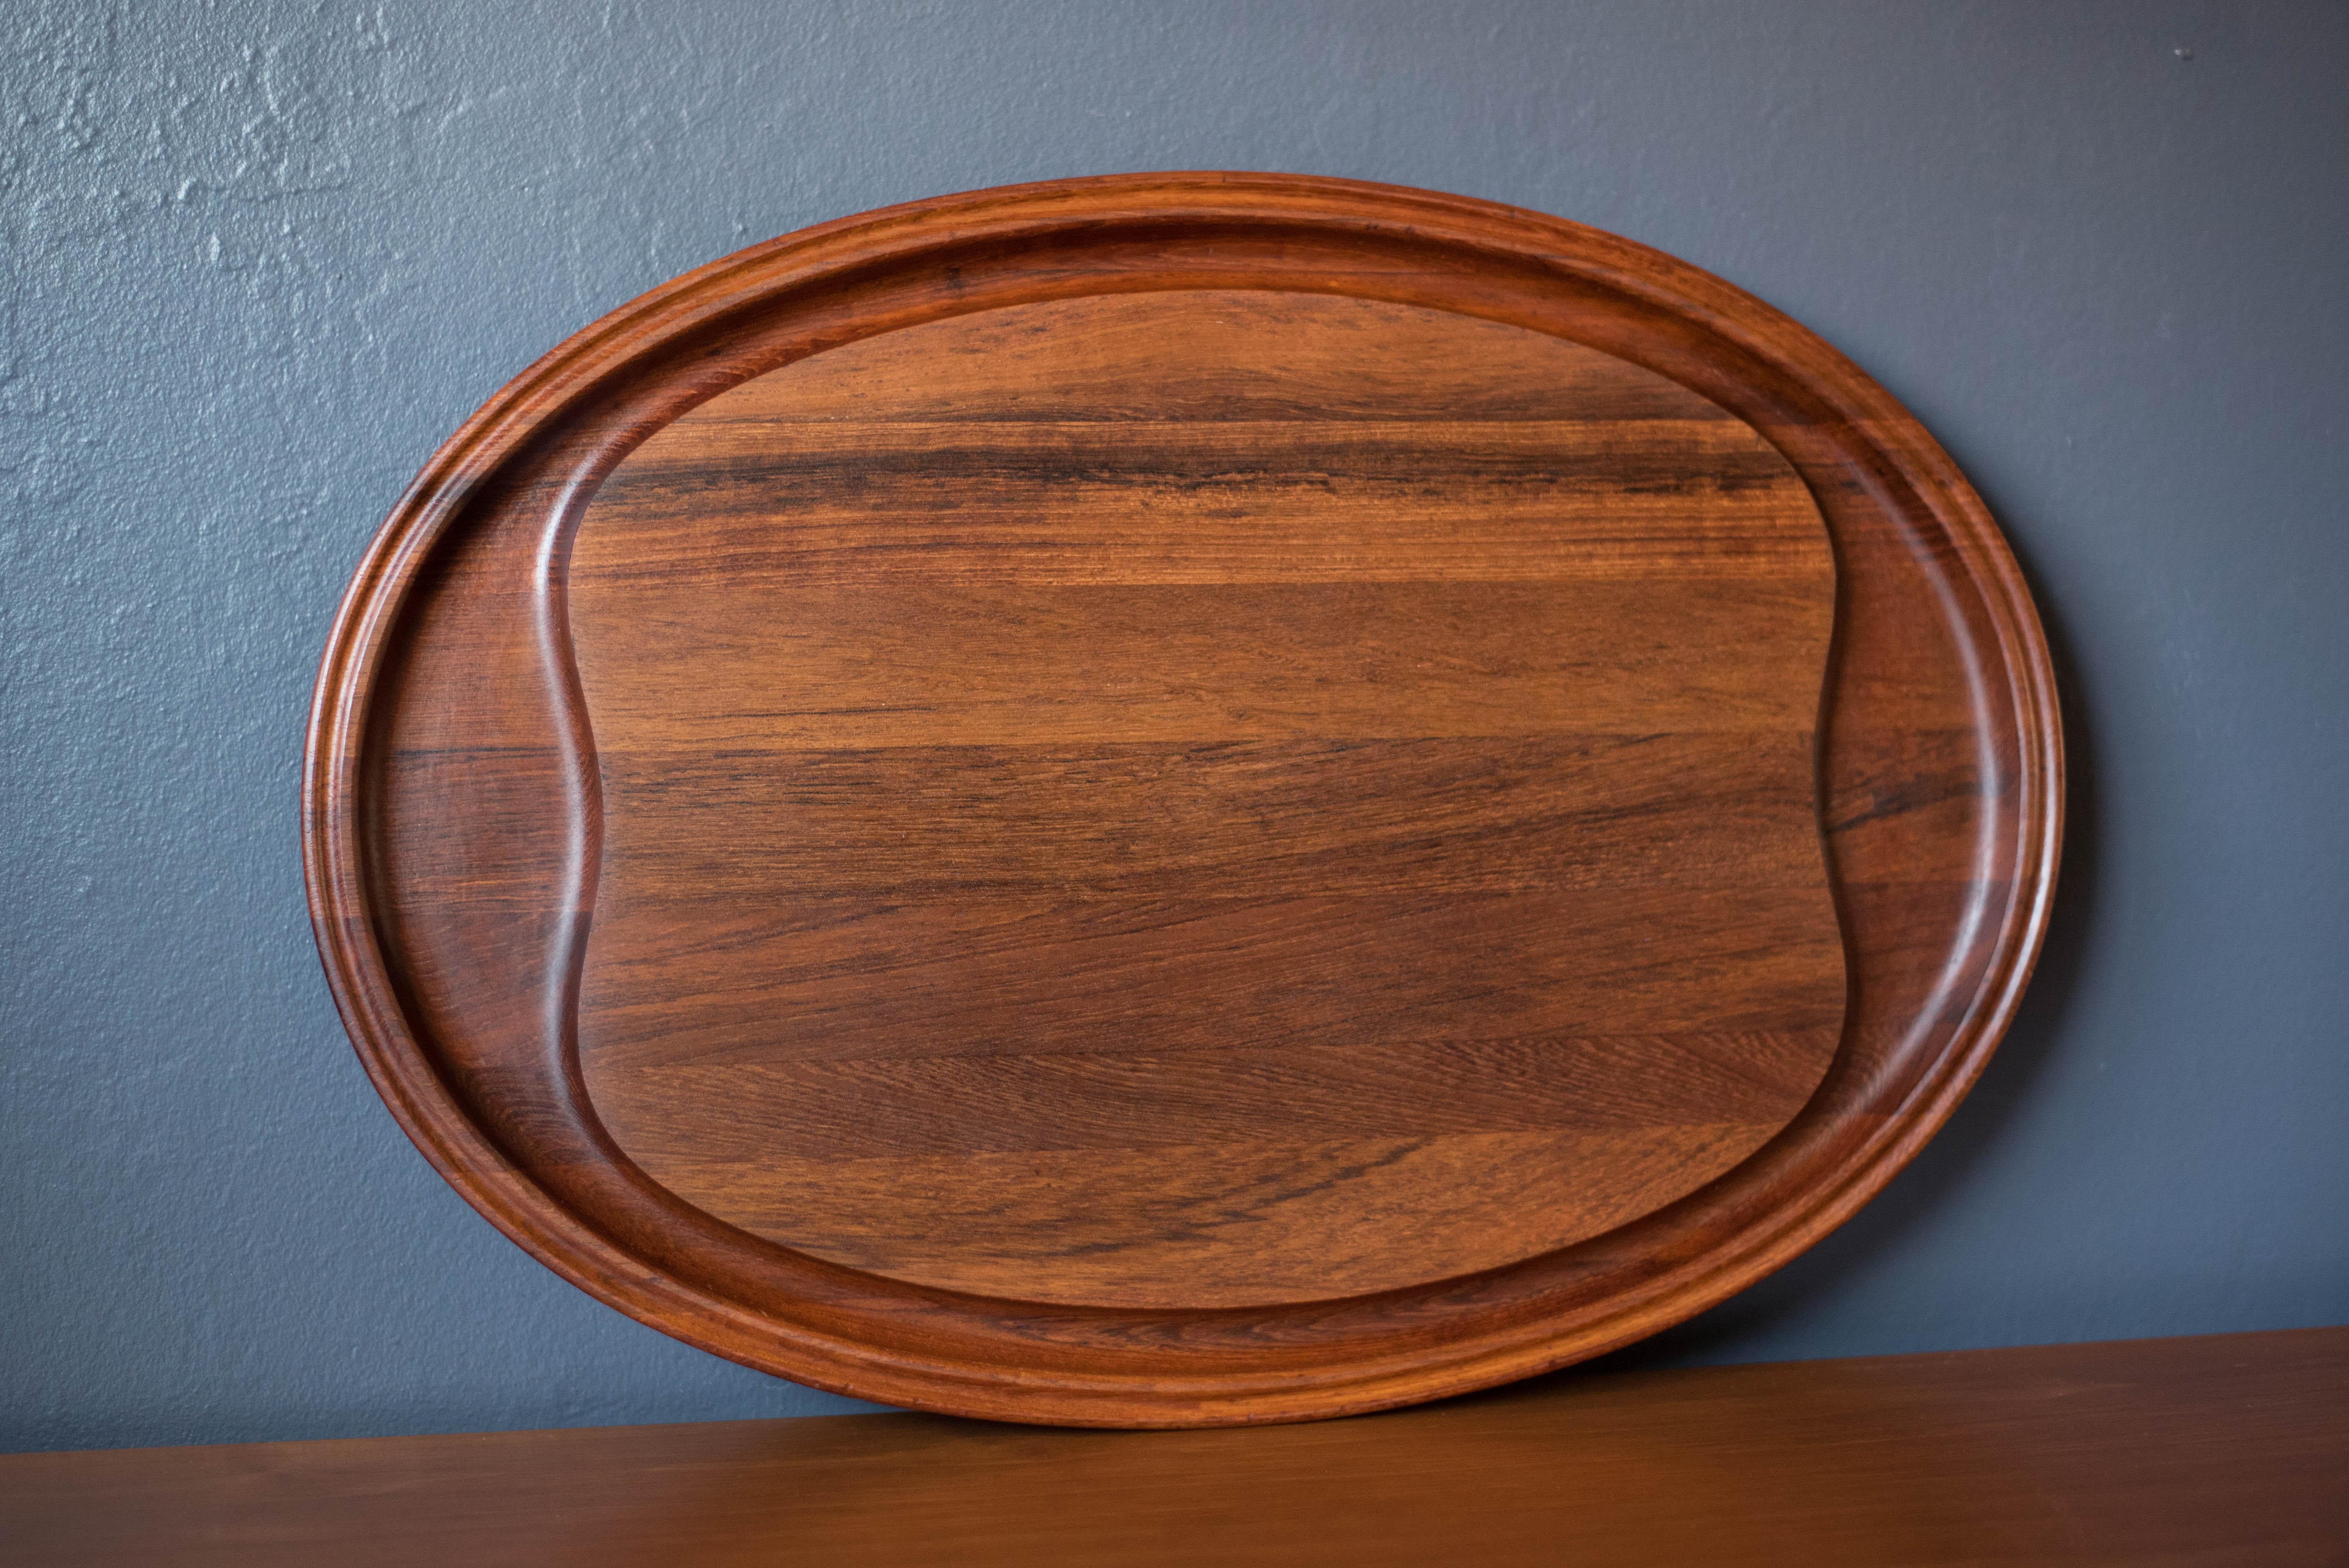 Mid-Century Modern cutting board platter designed by Henning Koppel for Georg Jensen, Denmark. This sculptural oval tray displays rich solid teak grains with deep grooves intended for both prepping and serving. Perfect to accessorize as a display